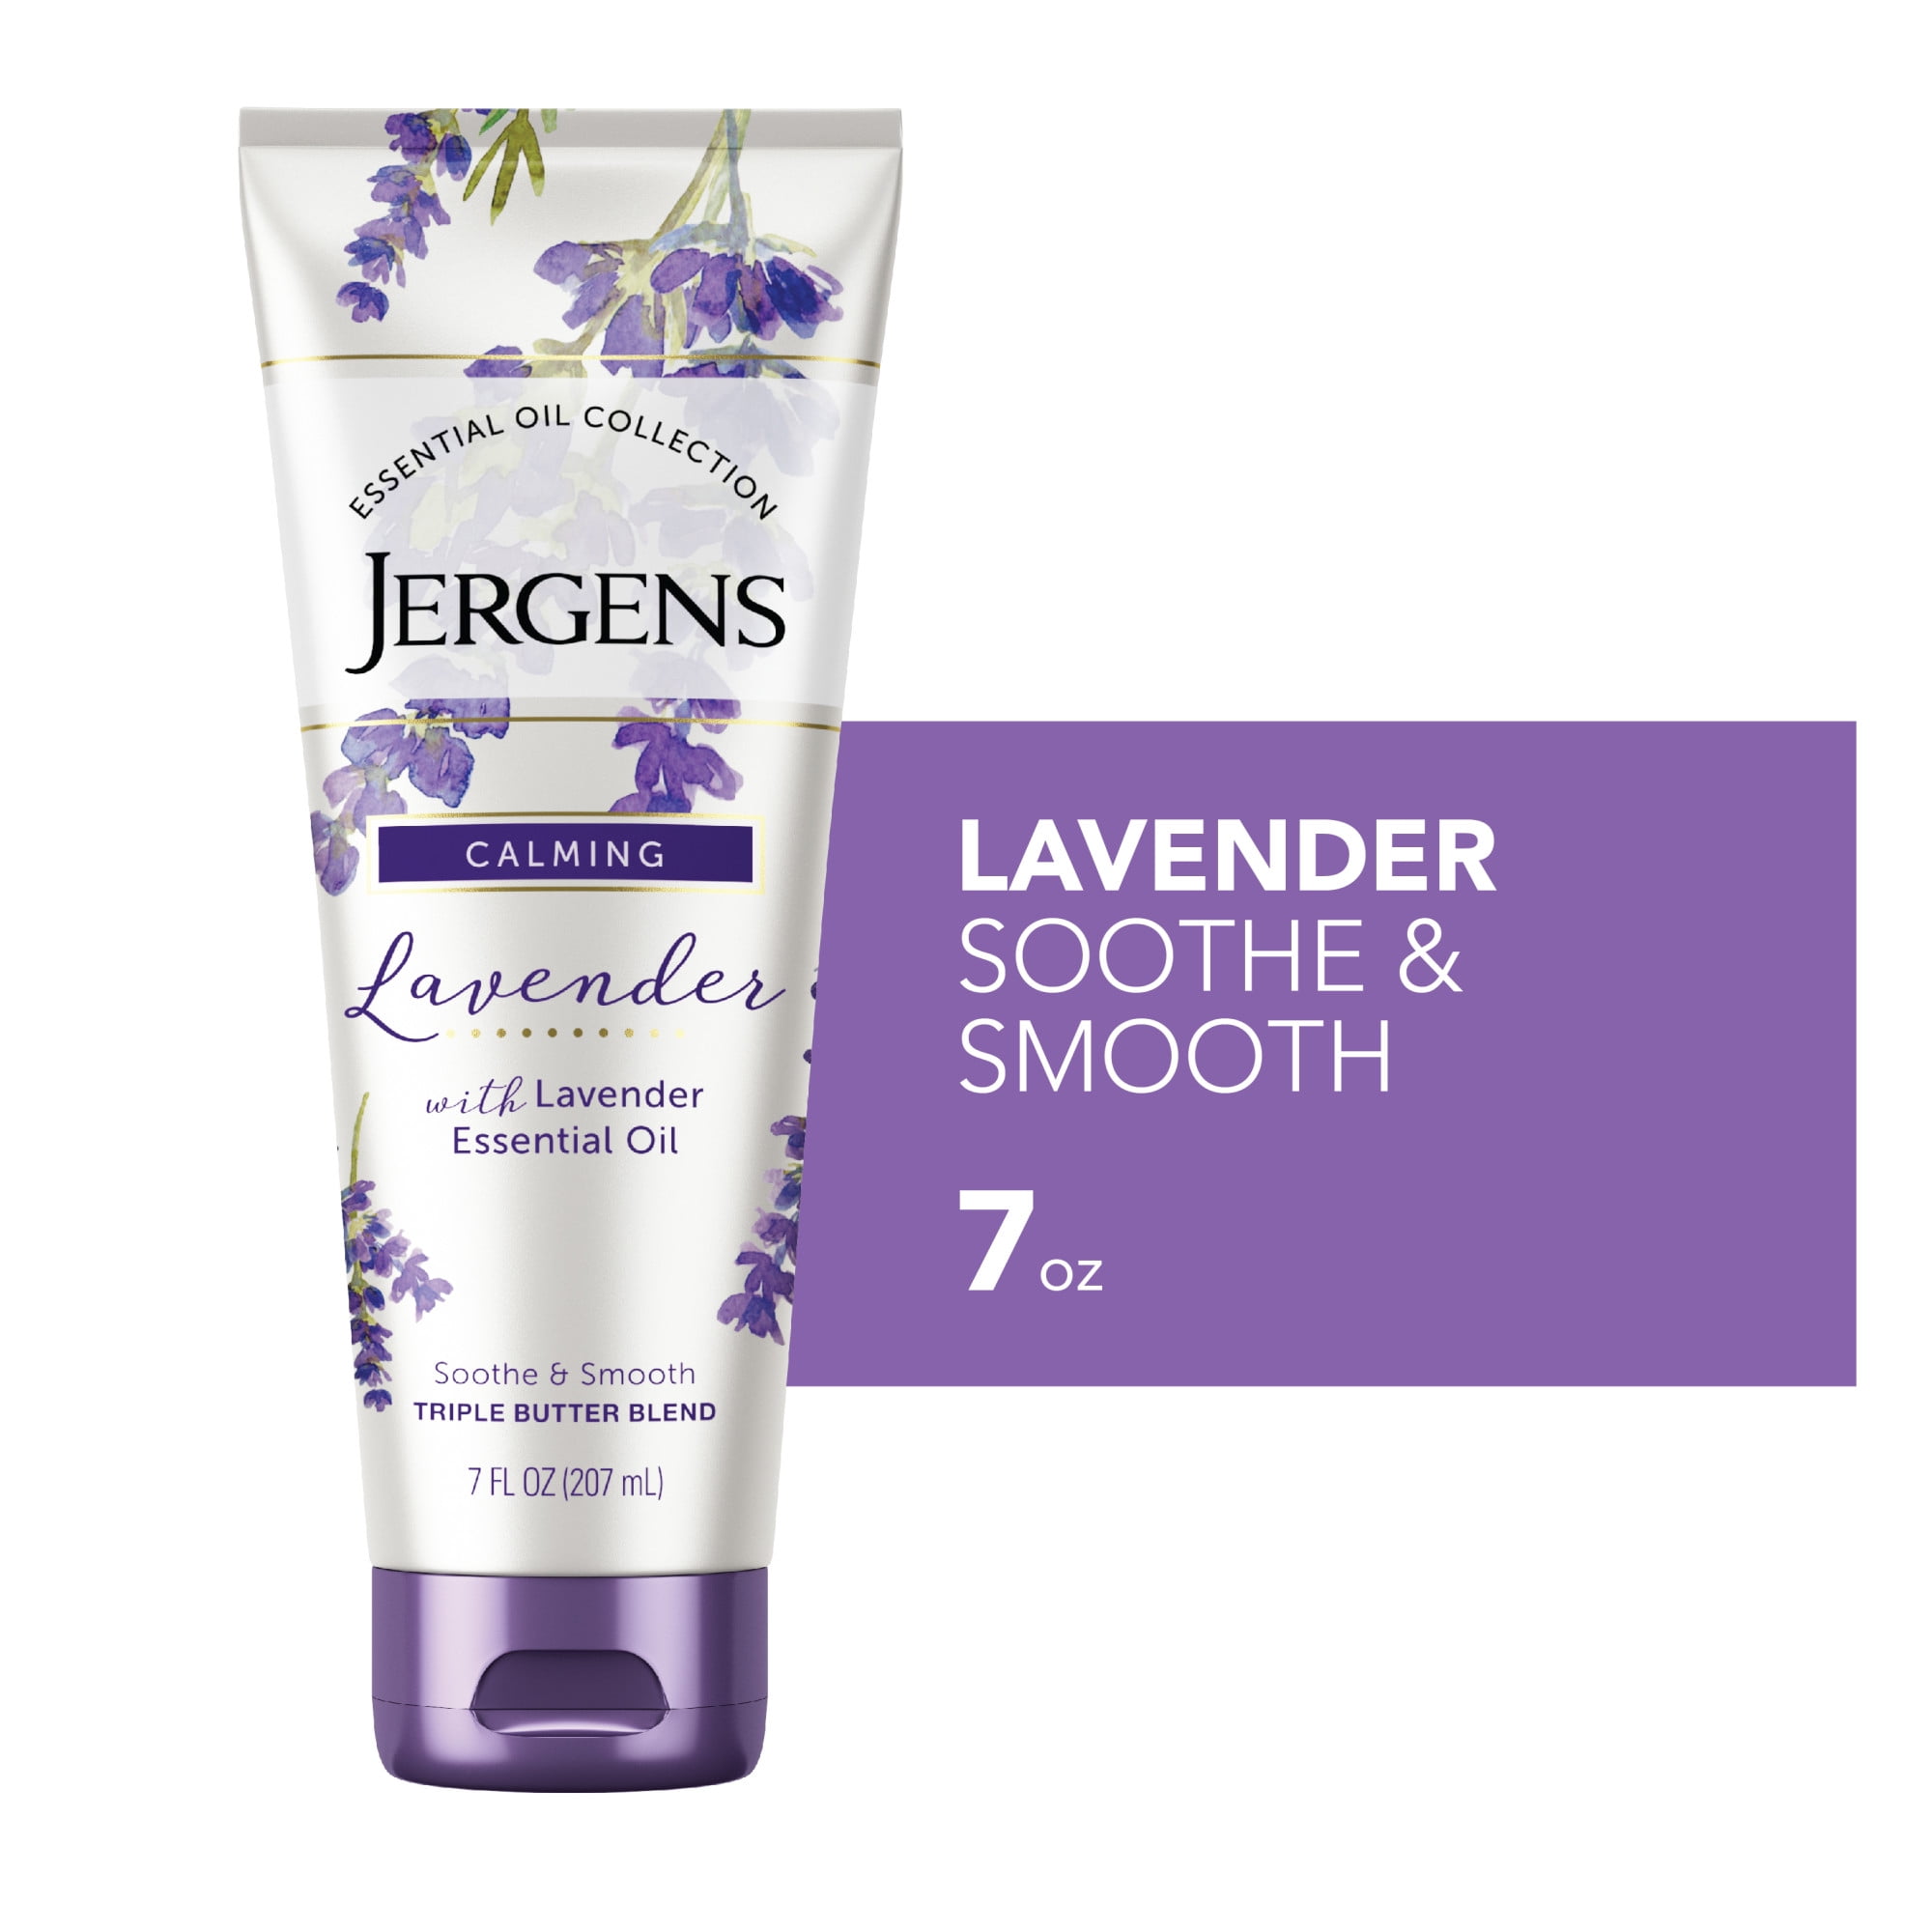 Jergens Hand and Body Lotion, Lavender Body Butter Moisturizing Lotion with Essential Oil, 7 Oz